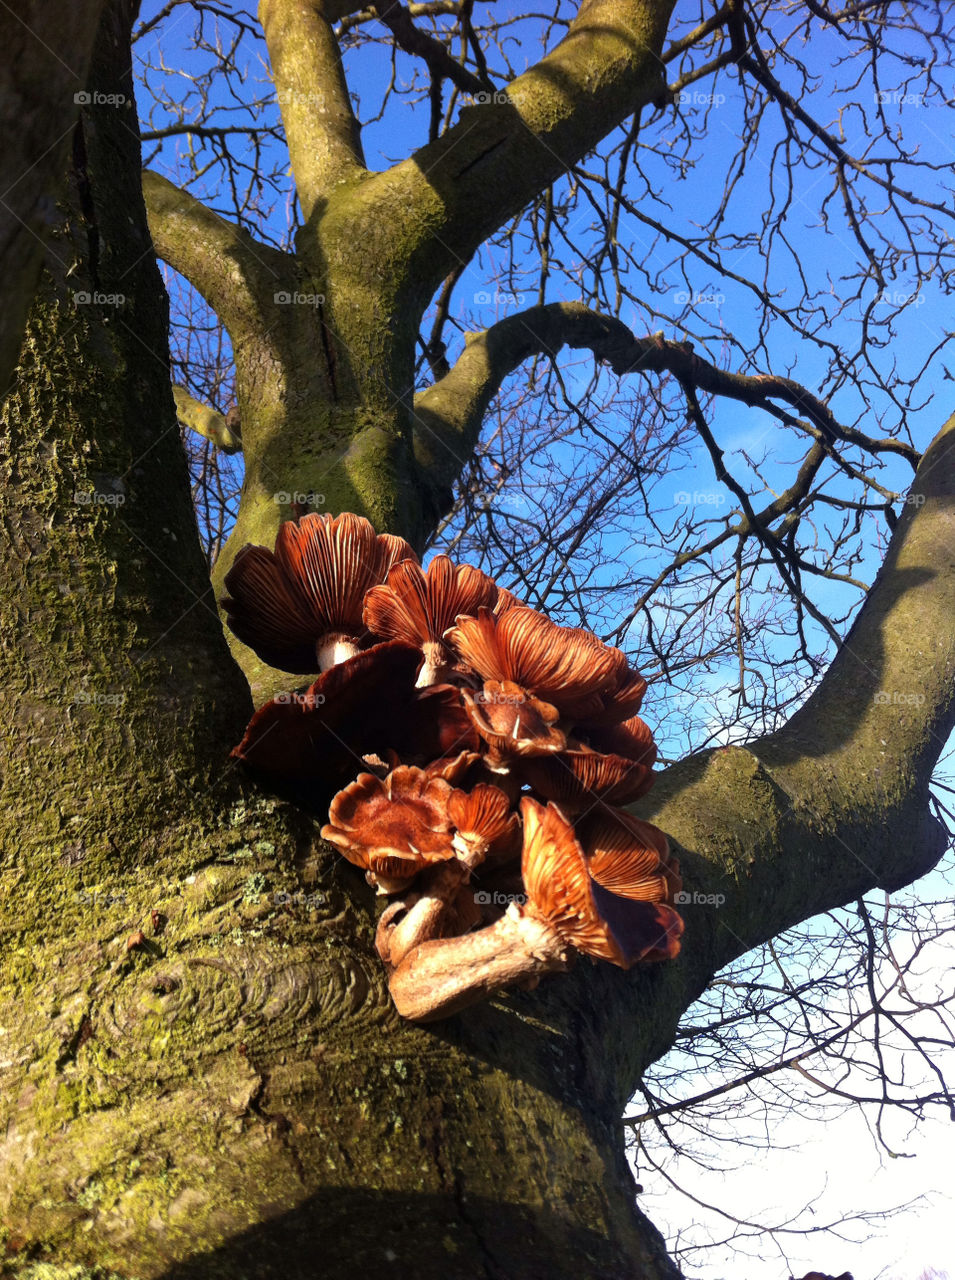 norwich norfolk uk tree autumn fungus by PollyWiggle